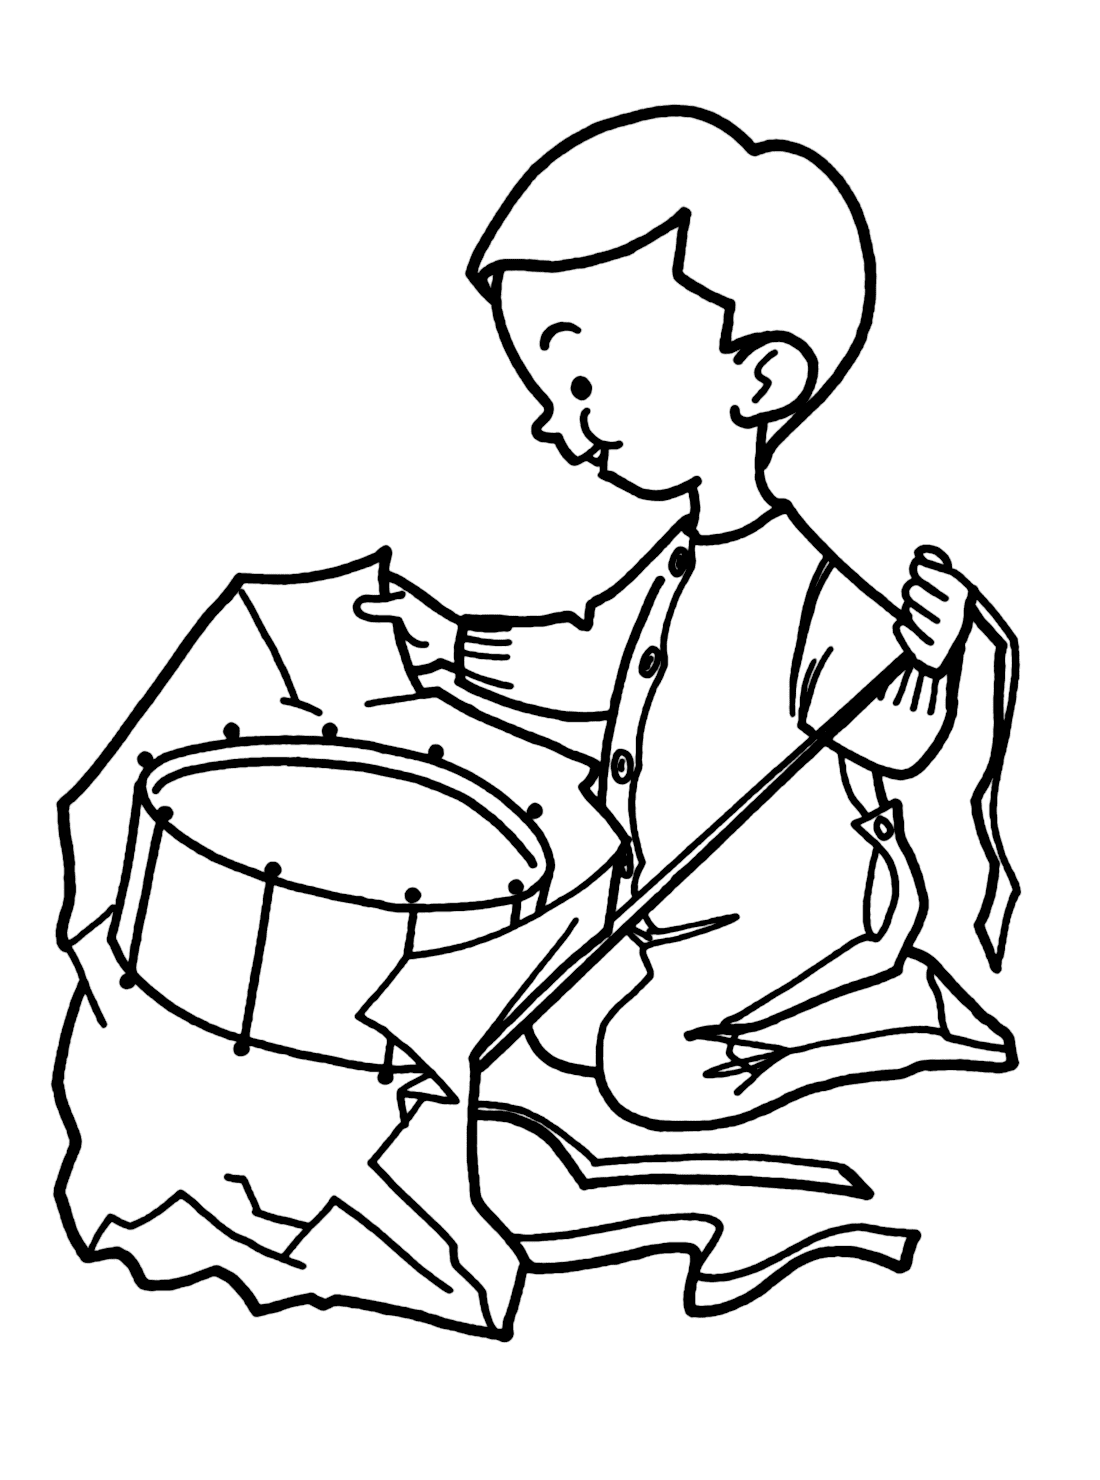 Jazz drum coloring pages